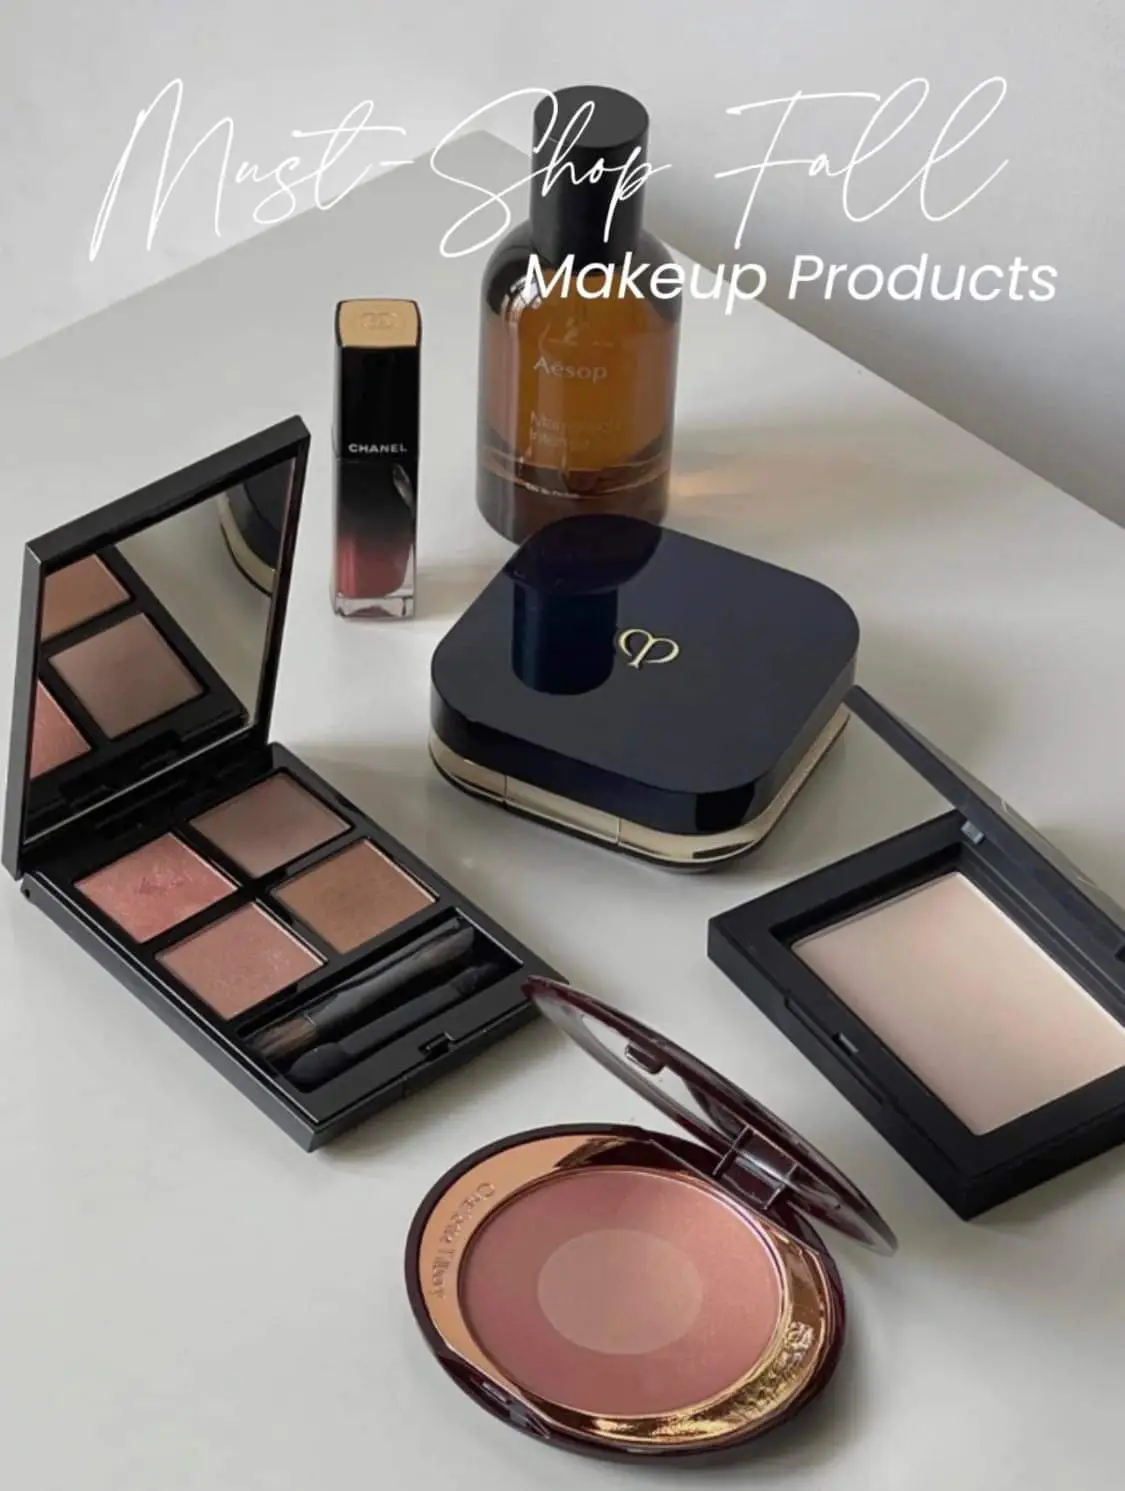 popular makeup products that are not worth purchsing!! #makeup #makeup, Makeup Product